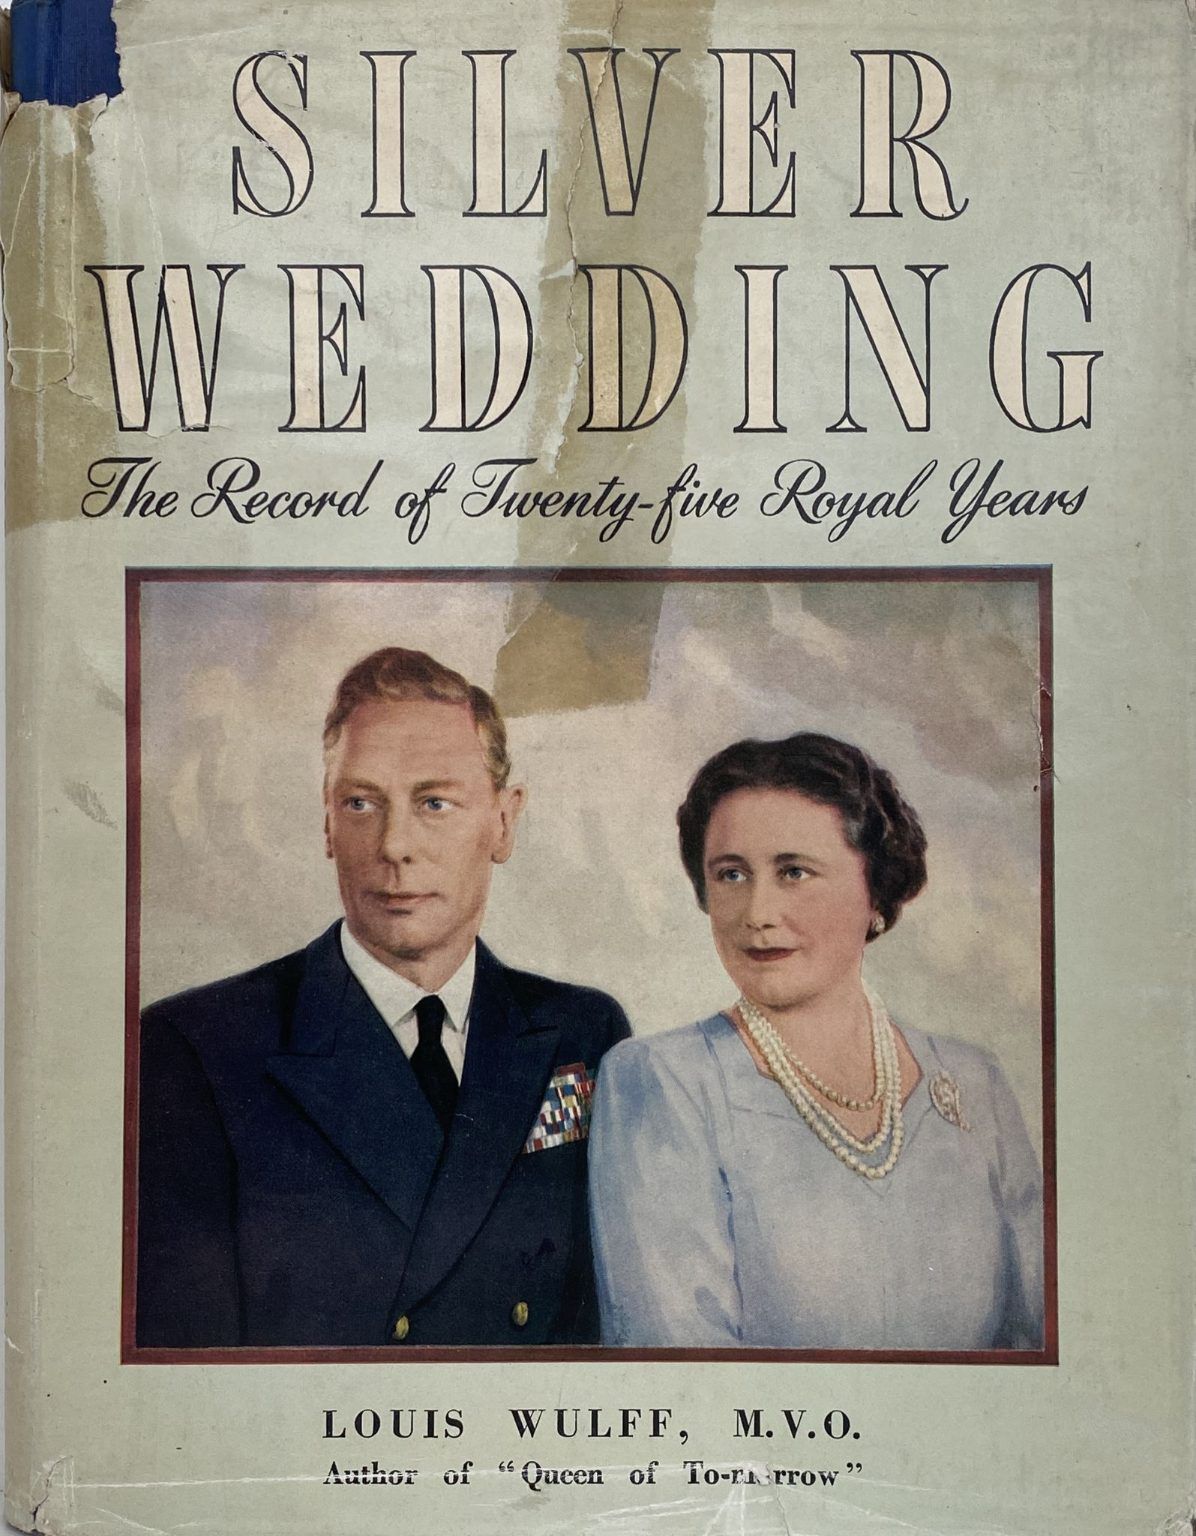 SILVER WEDDING: The Record of Twently Five Royal Years